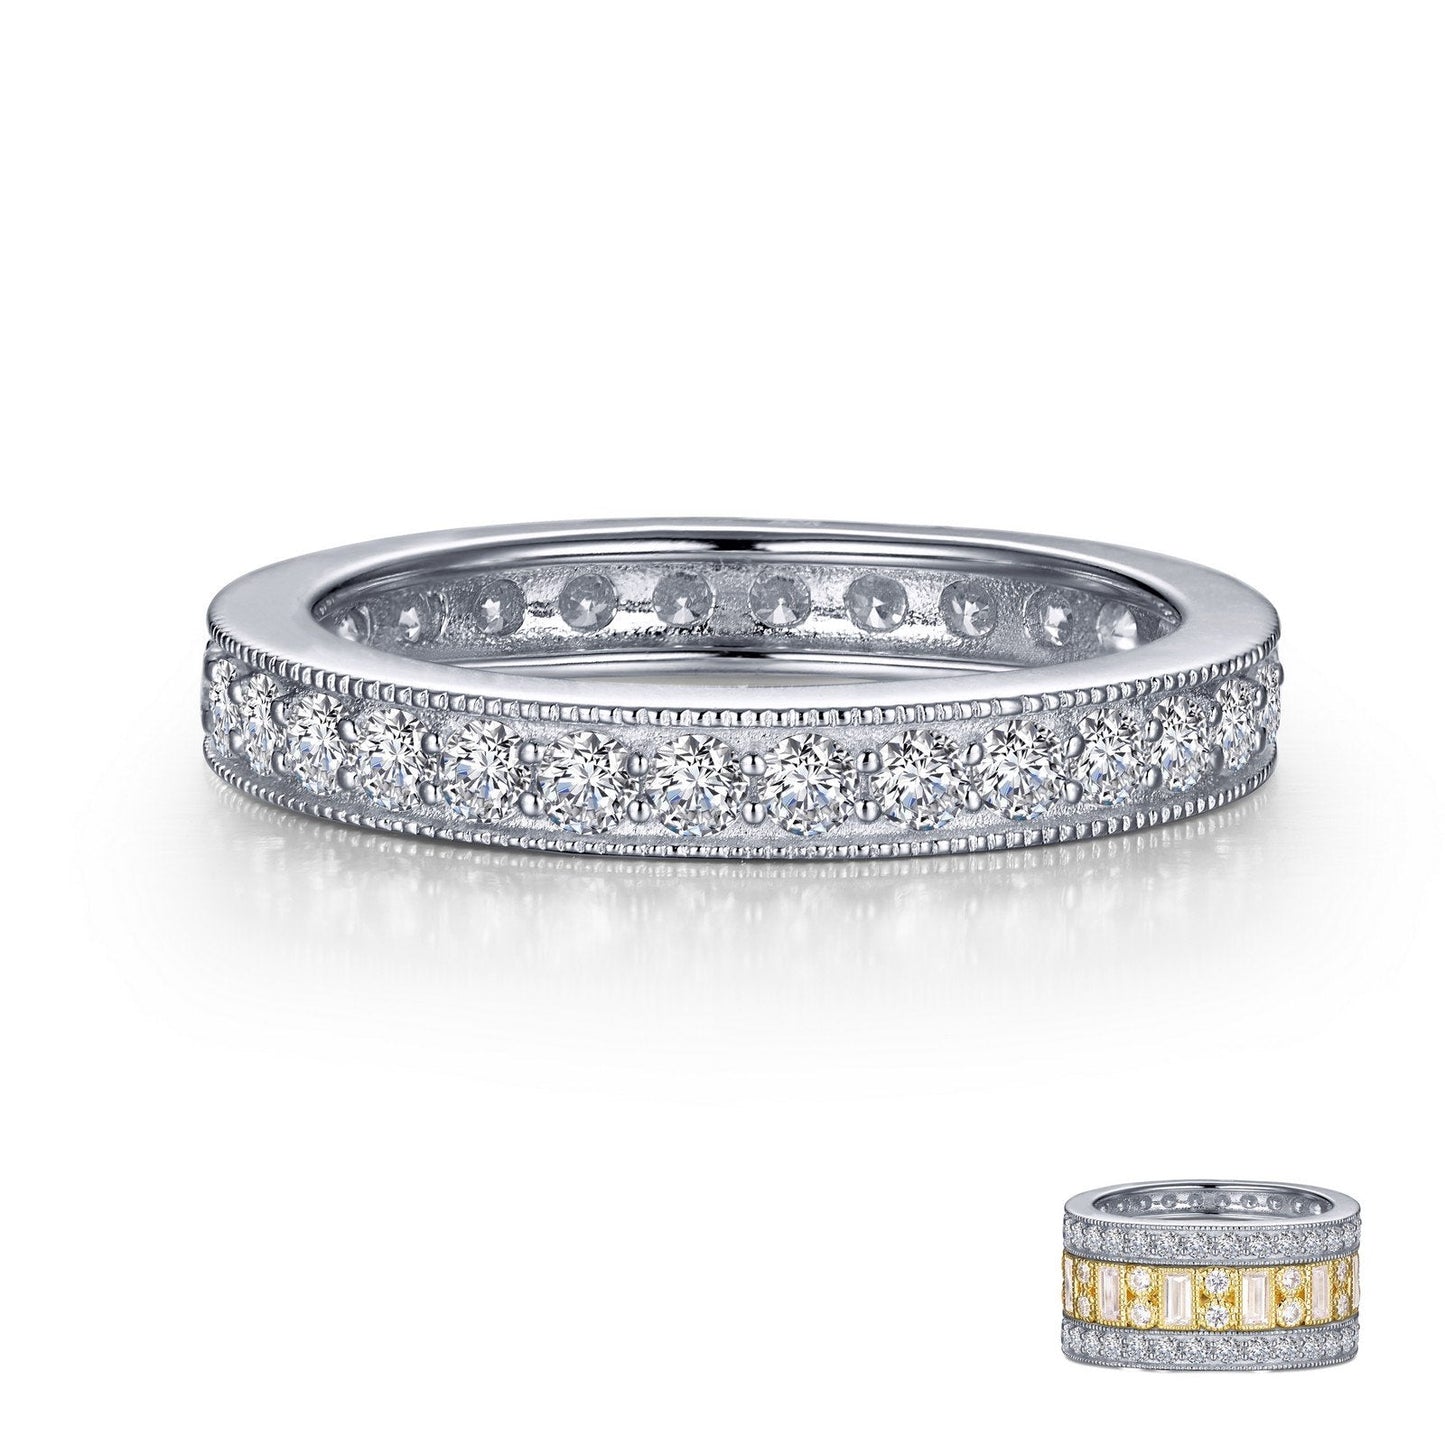 Lafonn 0.9 CTW Stackable Eternity Band Simulated Diamond RINGS Size 10 Platinum 0.9 CTS 3.4mm (W)